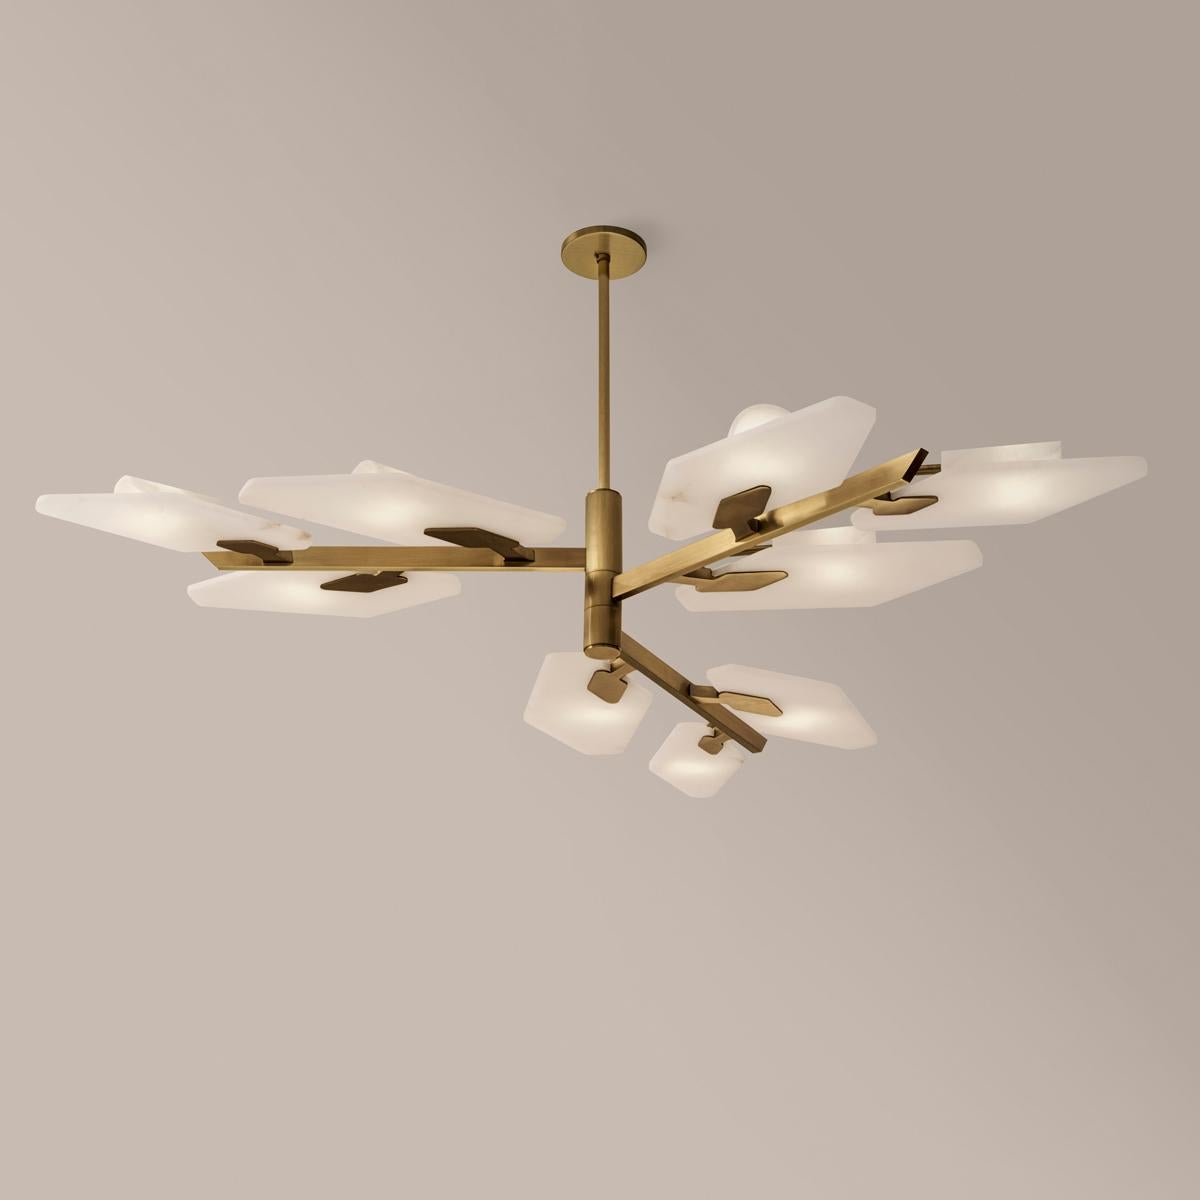 The Leaf ceiling light recalls nature with its branching arms and Tuscan alabaster “leaves” giving it a distinctive modern organic look.

Shown in the primary images in Bronzo Ottone-subsequent pictures show the fixture in satin brass.

Starting at